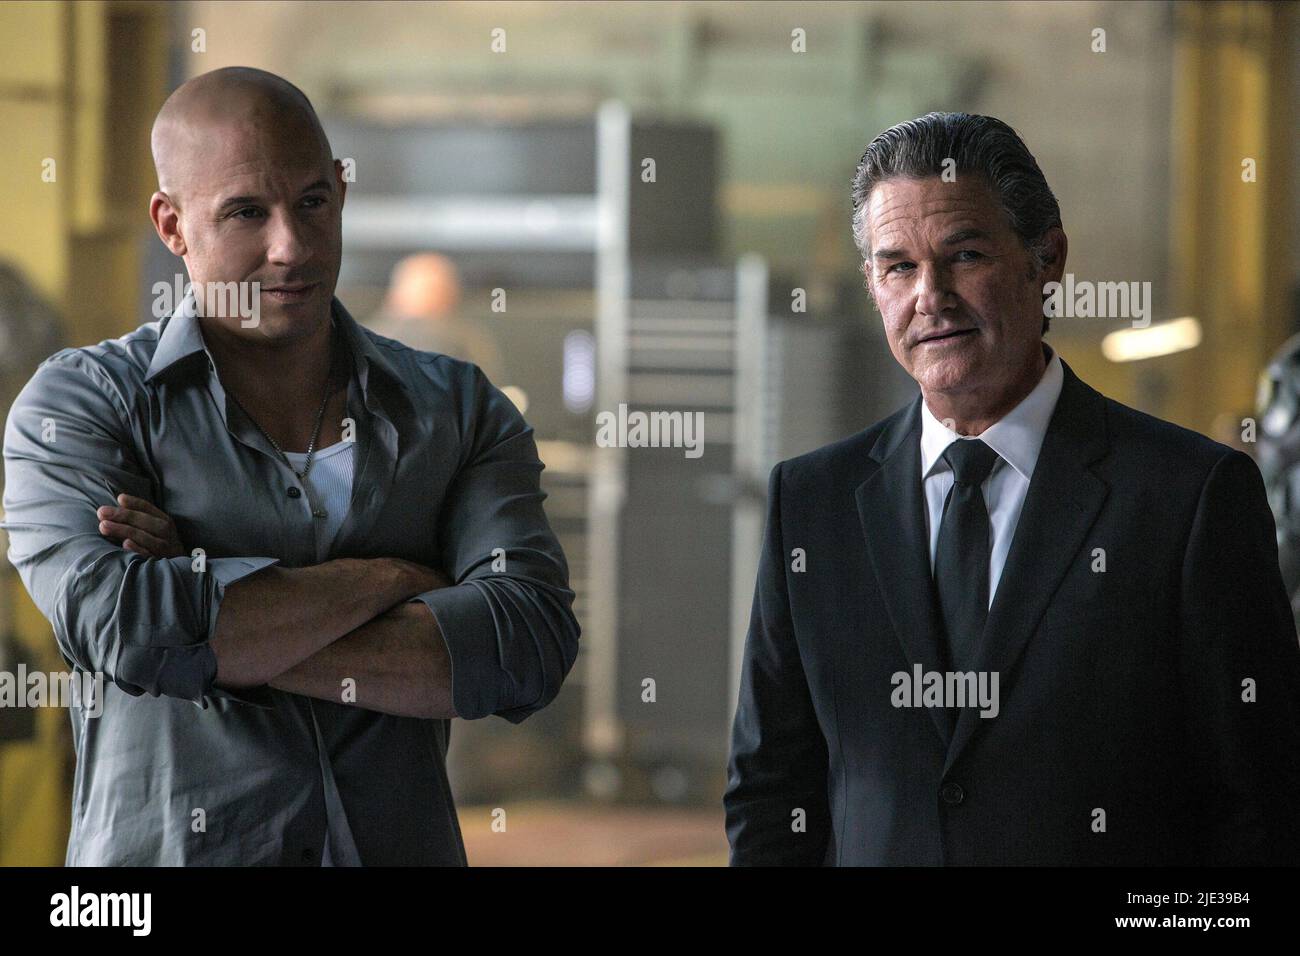 DIESEL, RUSSELL, FAST AND FURIOUS 7, 2015 Stockfoto